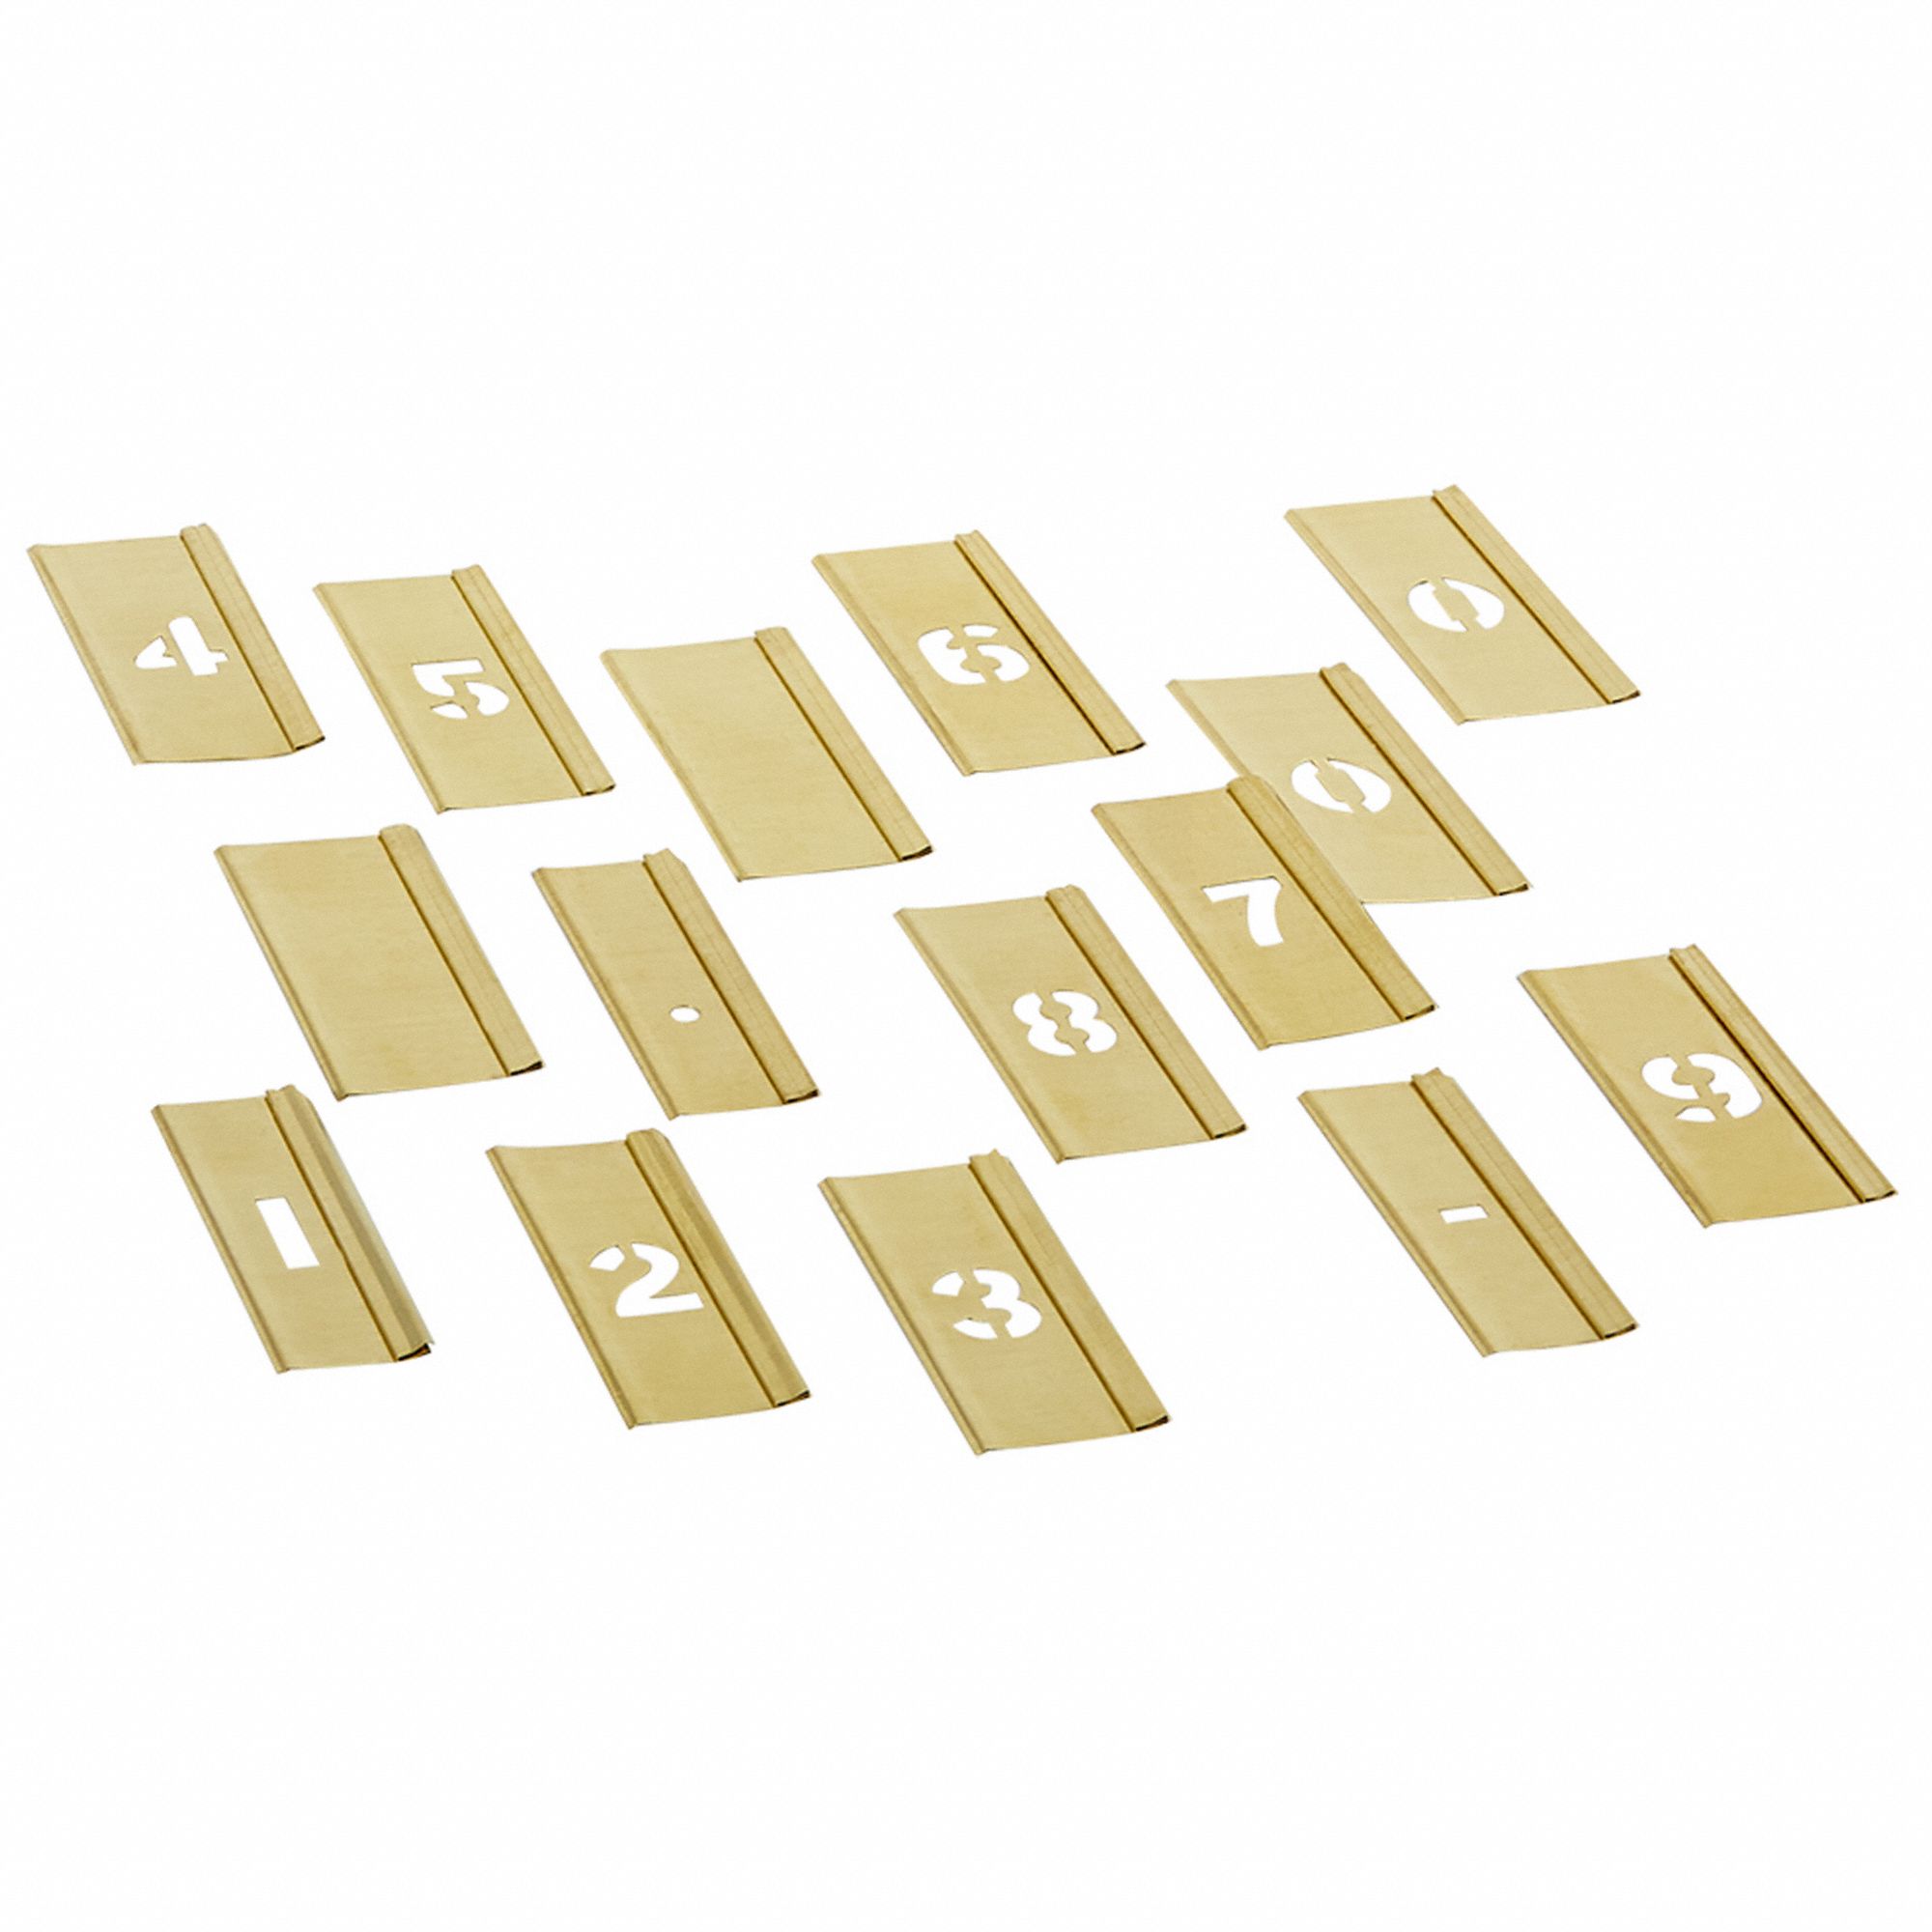 Stencil: 1/2 in Character Ht, 1/2 in Character Wd, Brass, 0.012 in Thick